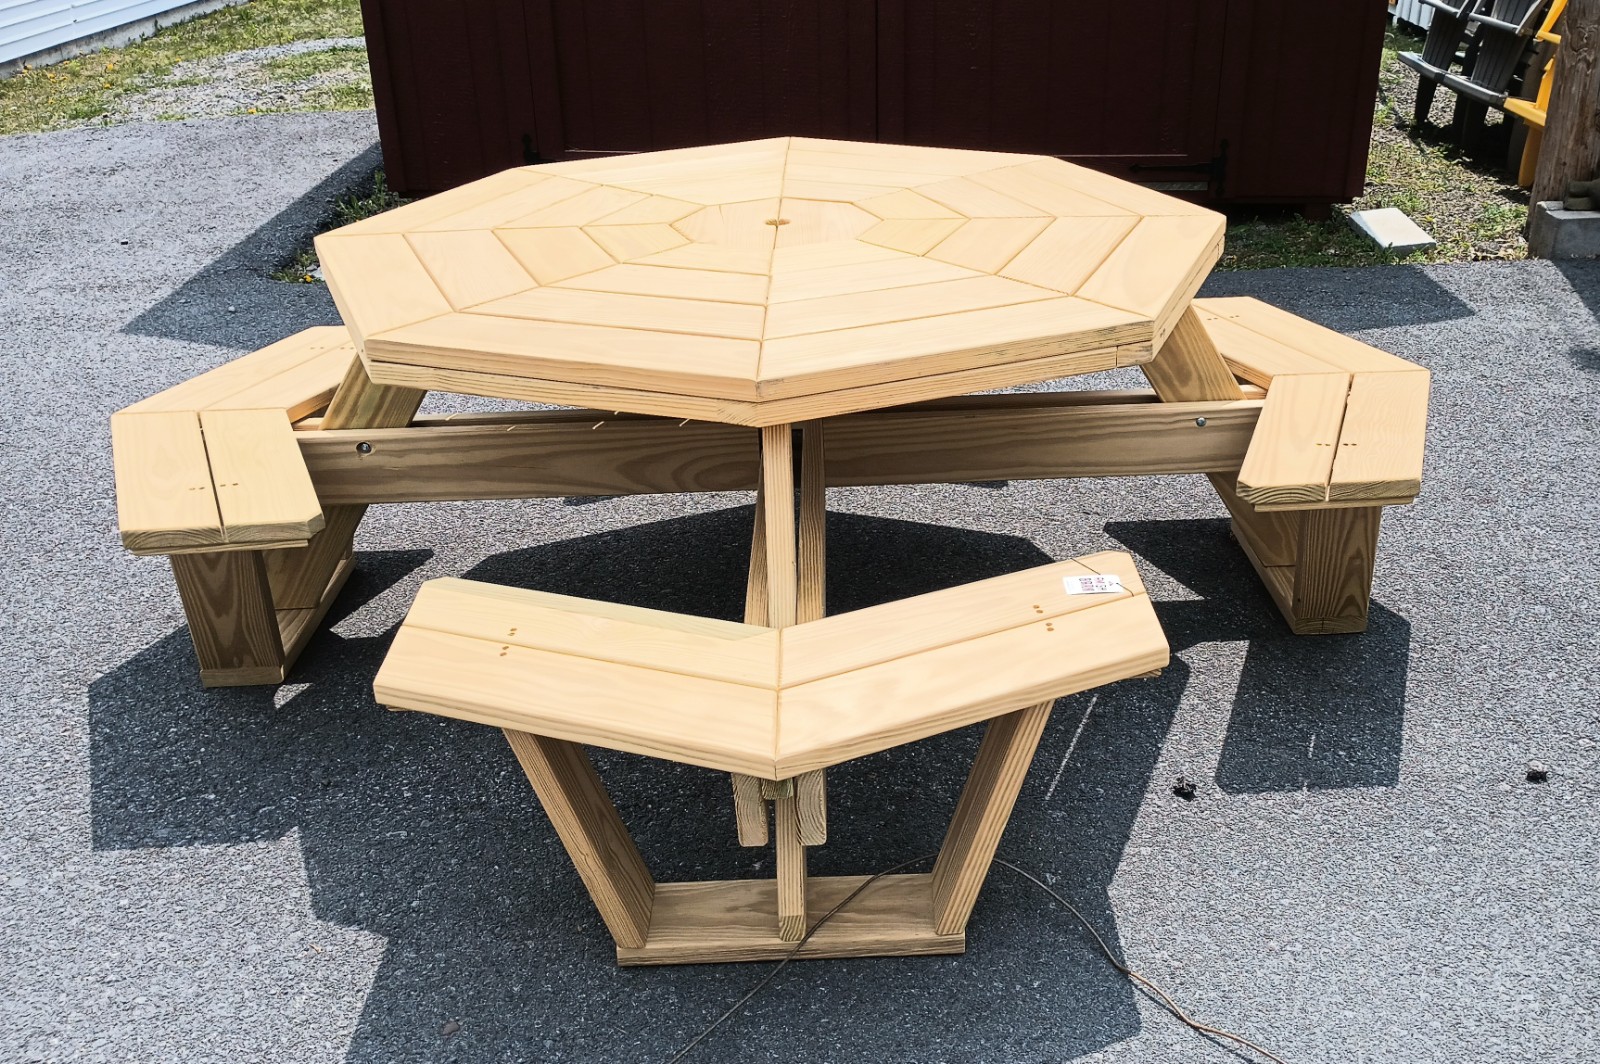 Octagonal Wooden Table with Attached Benches